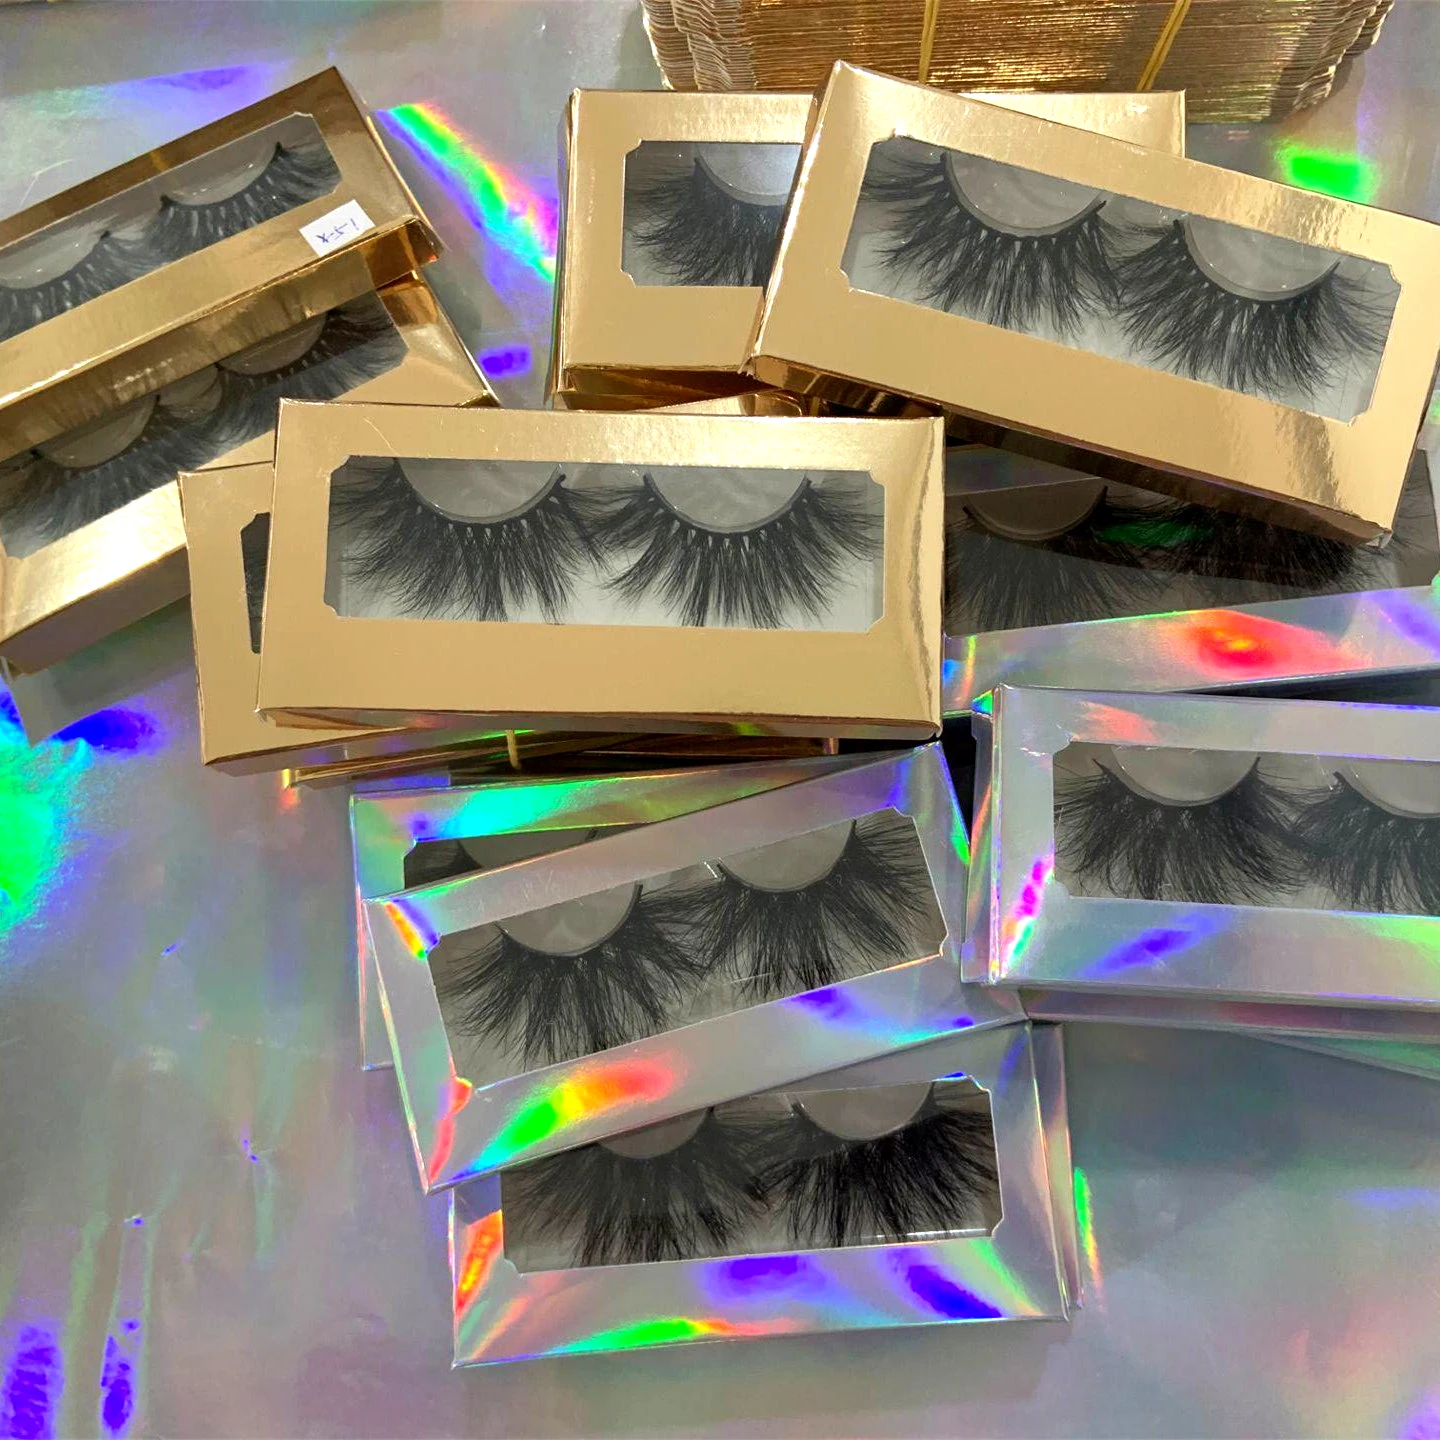 

Wholesale 100% Cruelty free 3d mink full strip eyelashes 3D Mink Lashes 25mm Real Siberian Mink Eyelashes private label, Natural black